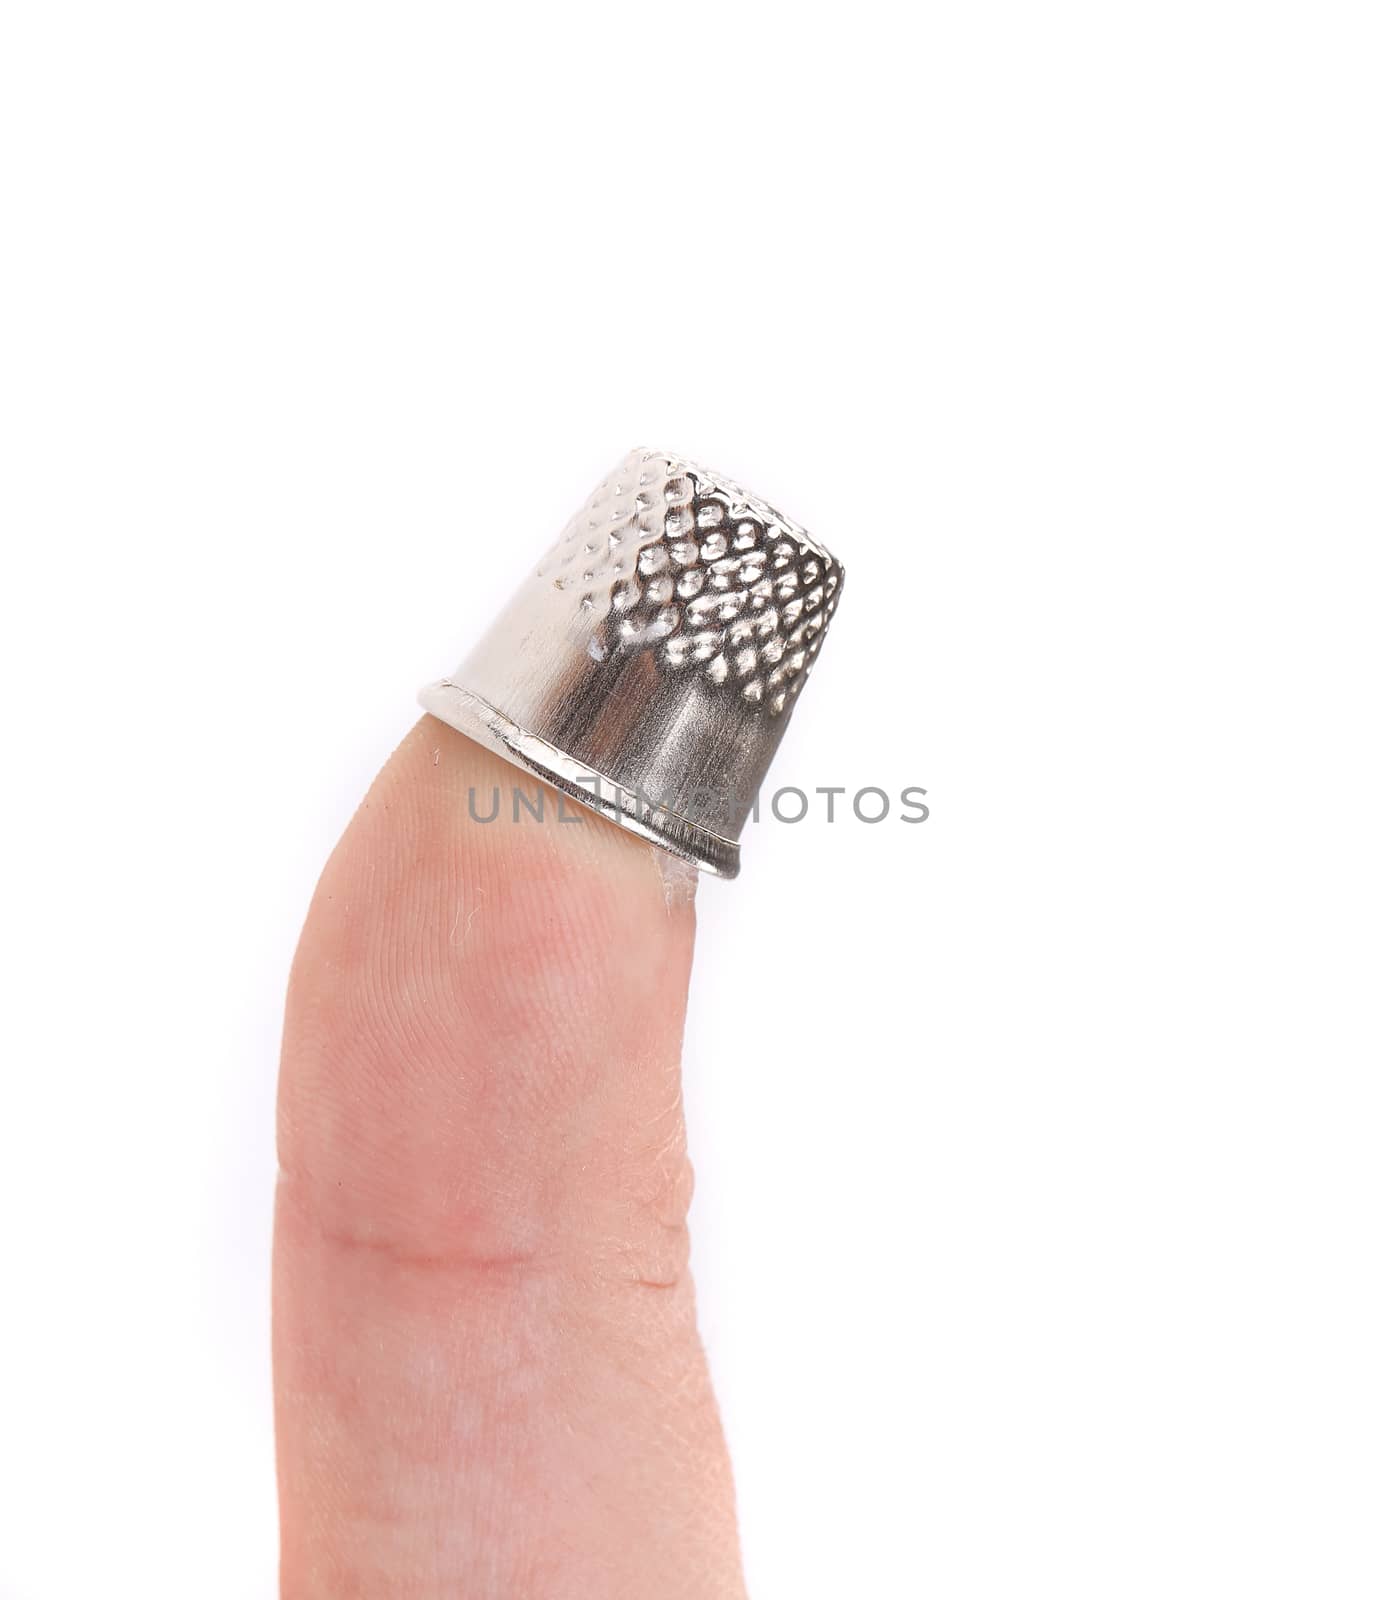 Protective thimble on the man hand. Isolated on a white background.